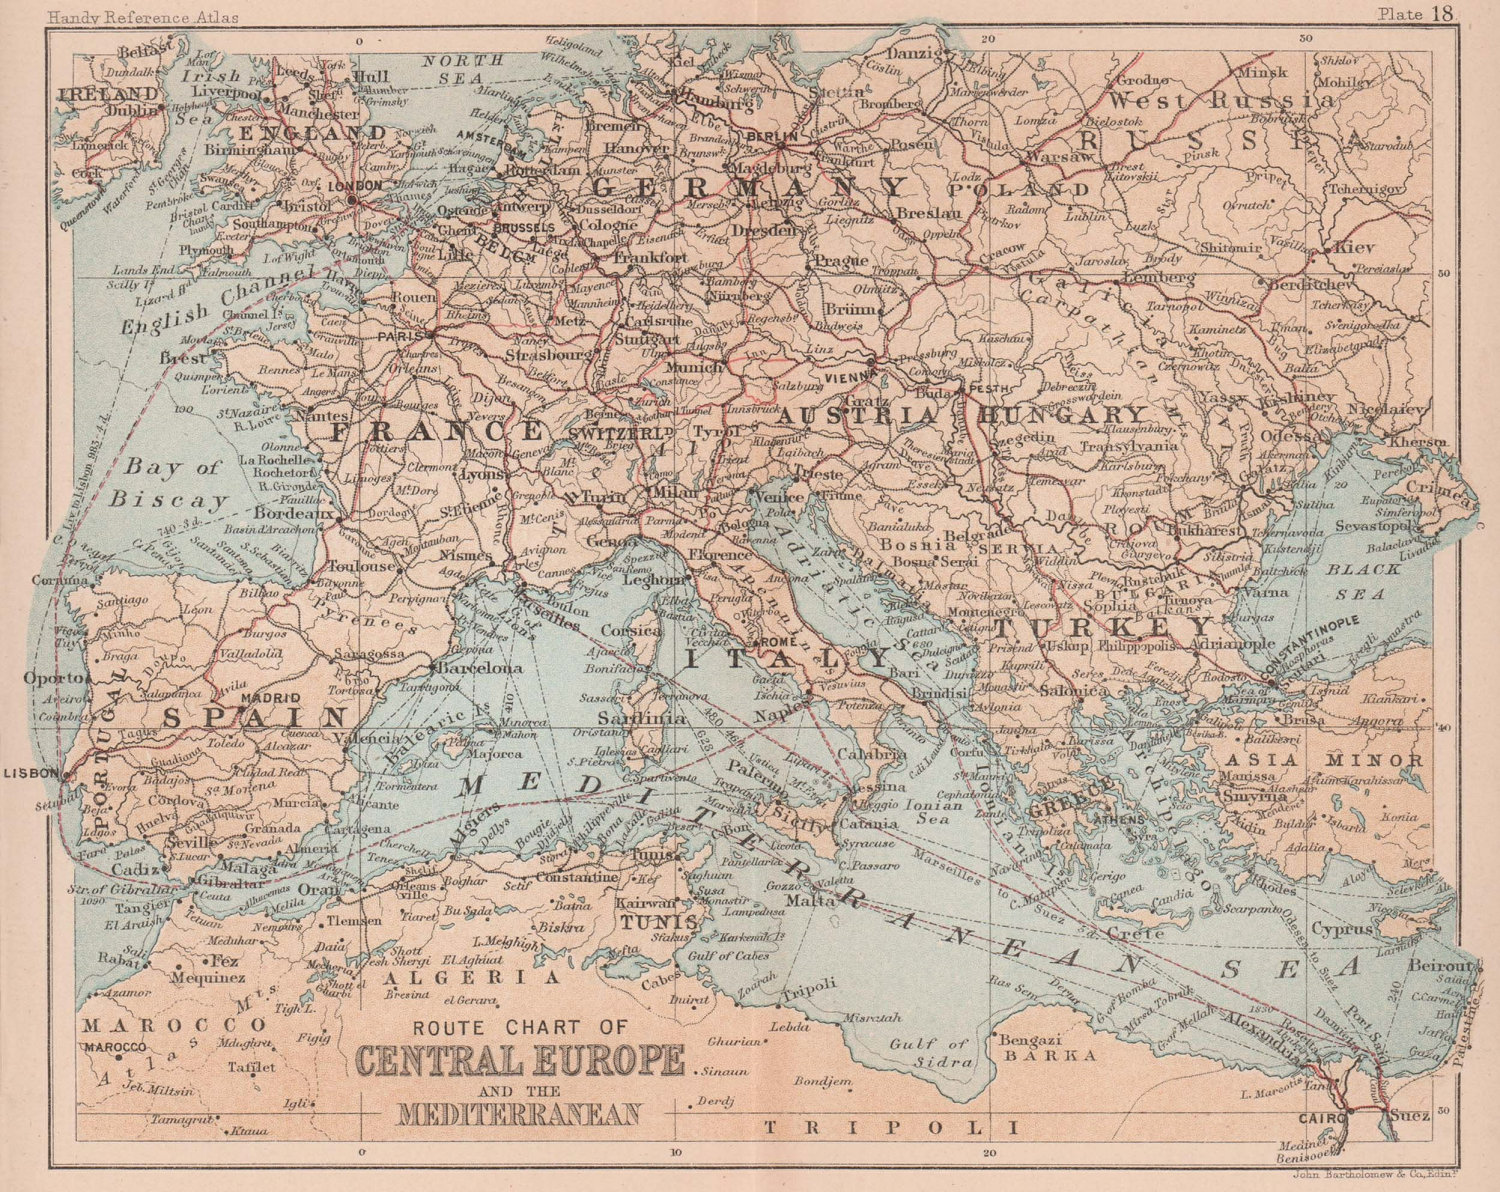 Associate Product Central Europe & Mediterranean routes. Railways. Steamers. BARTHOLOMEW 1888 map